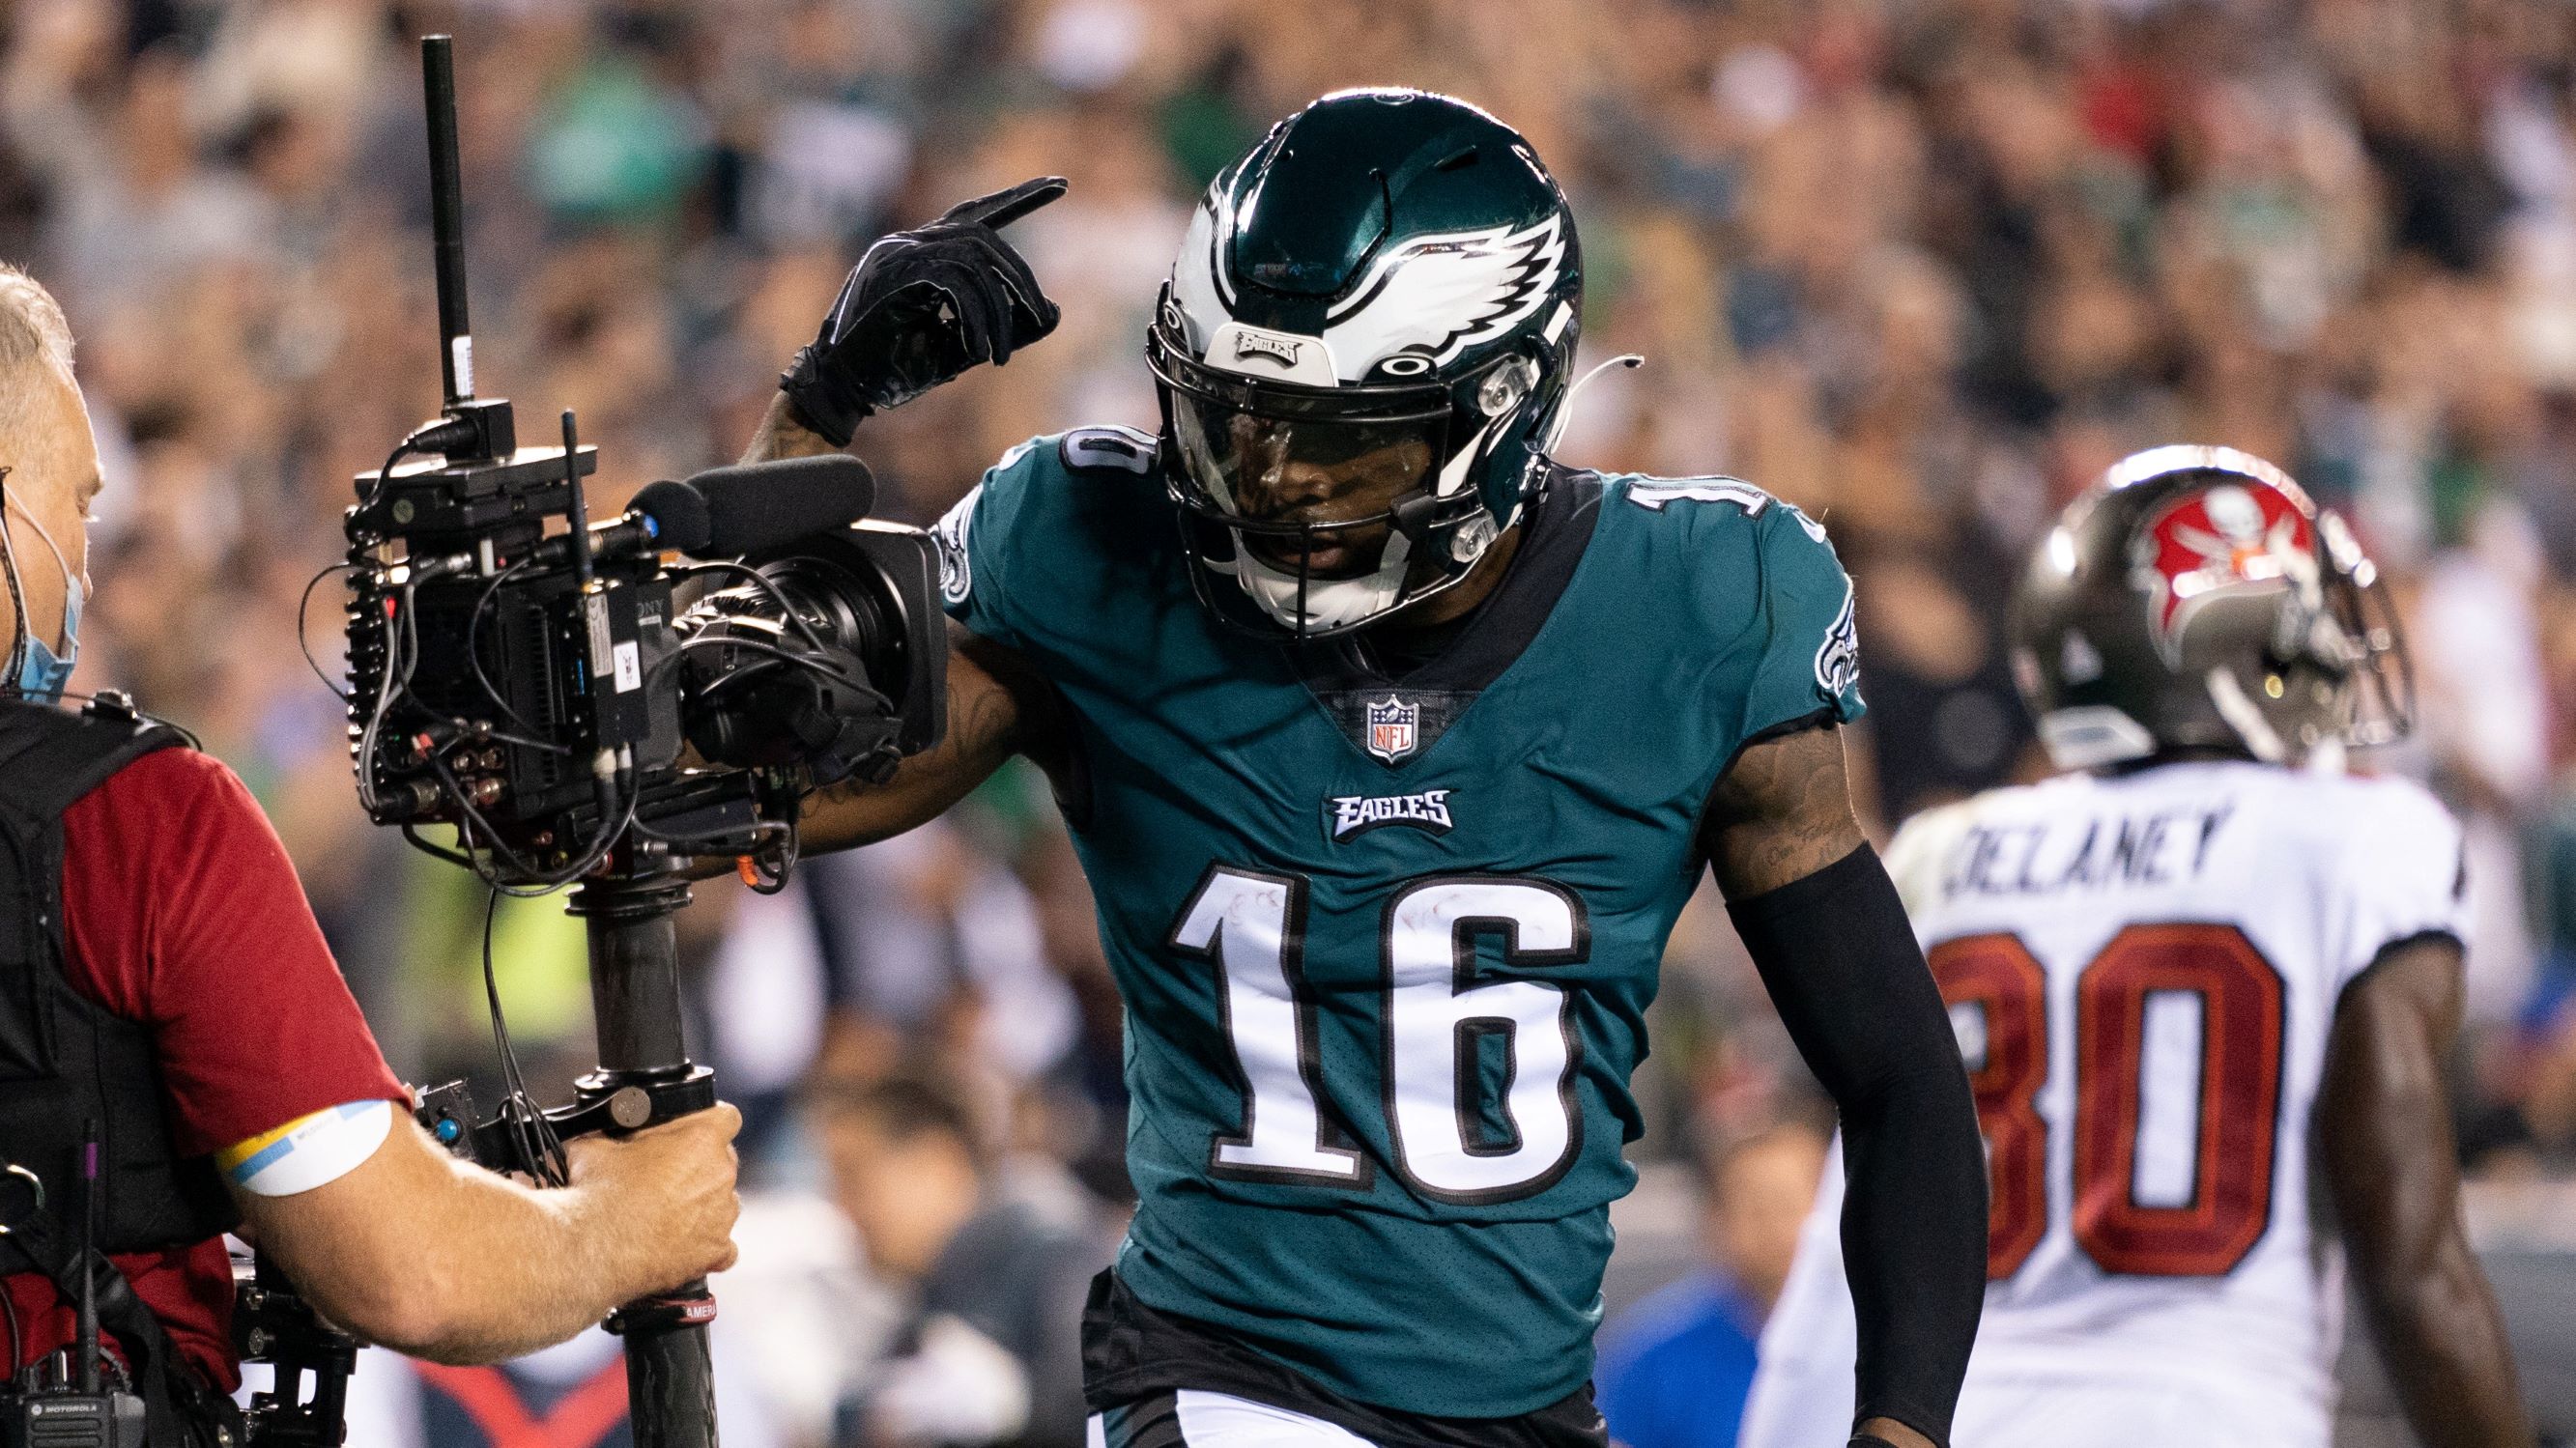 Eagles vs. Commanders game: How to watch NFL week 4 for free on FOX 